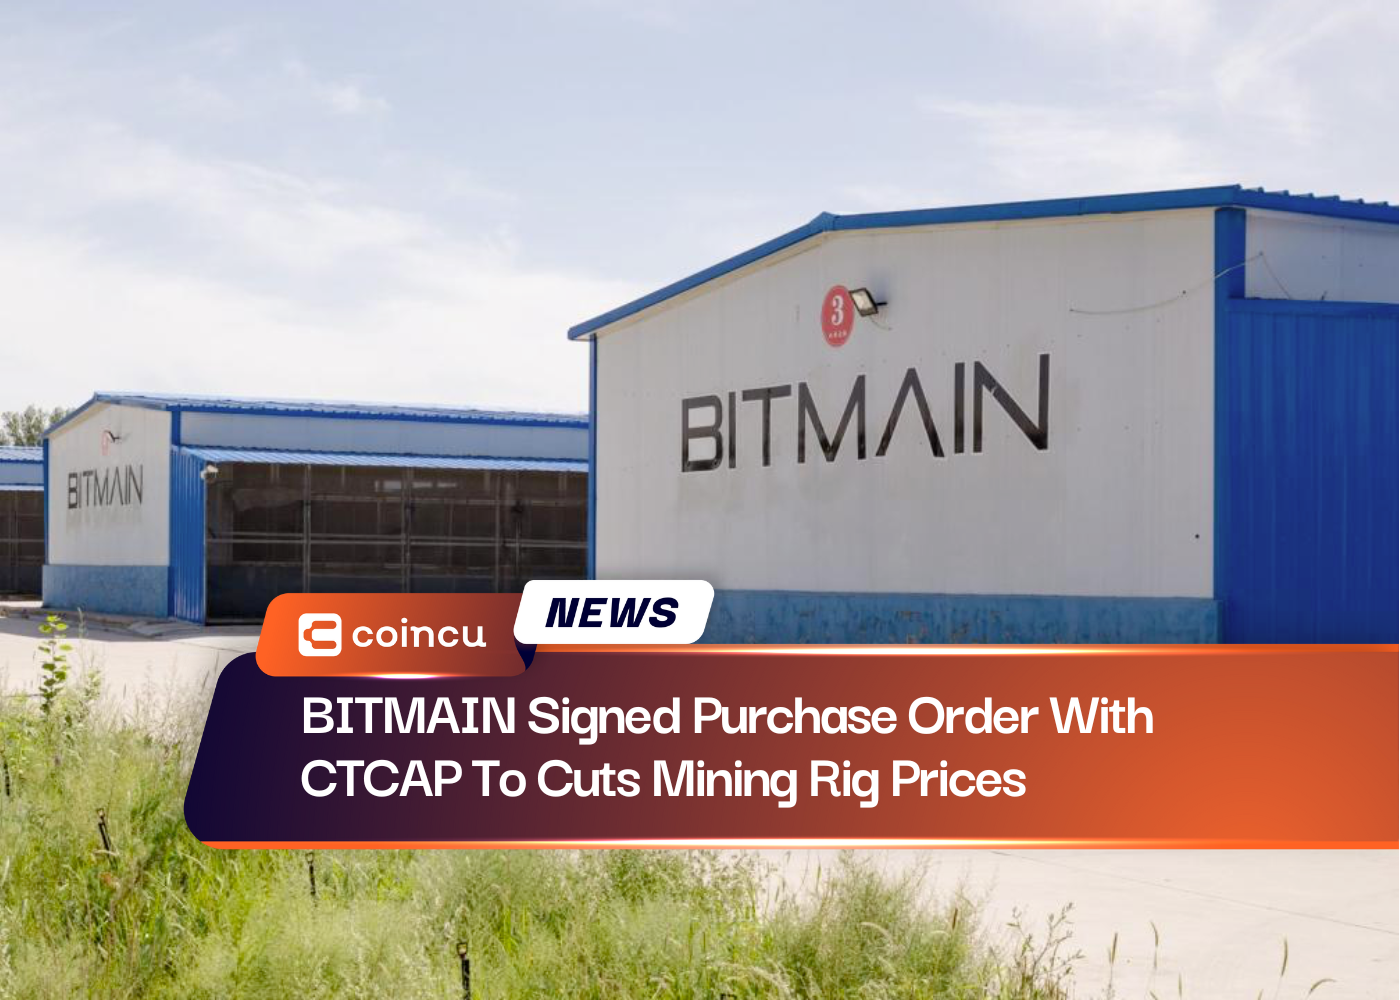 BITMAIN Signed Purchase Order With CTCAP To Cuts Mining Rig Prices